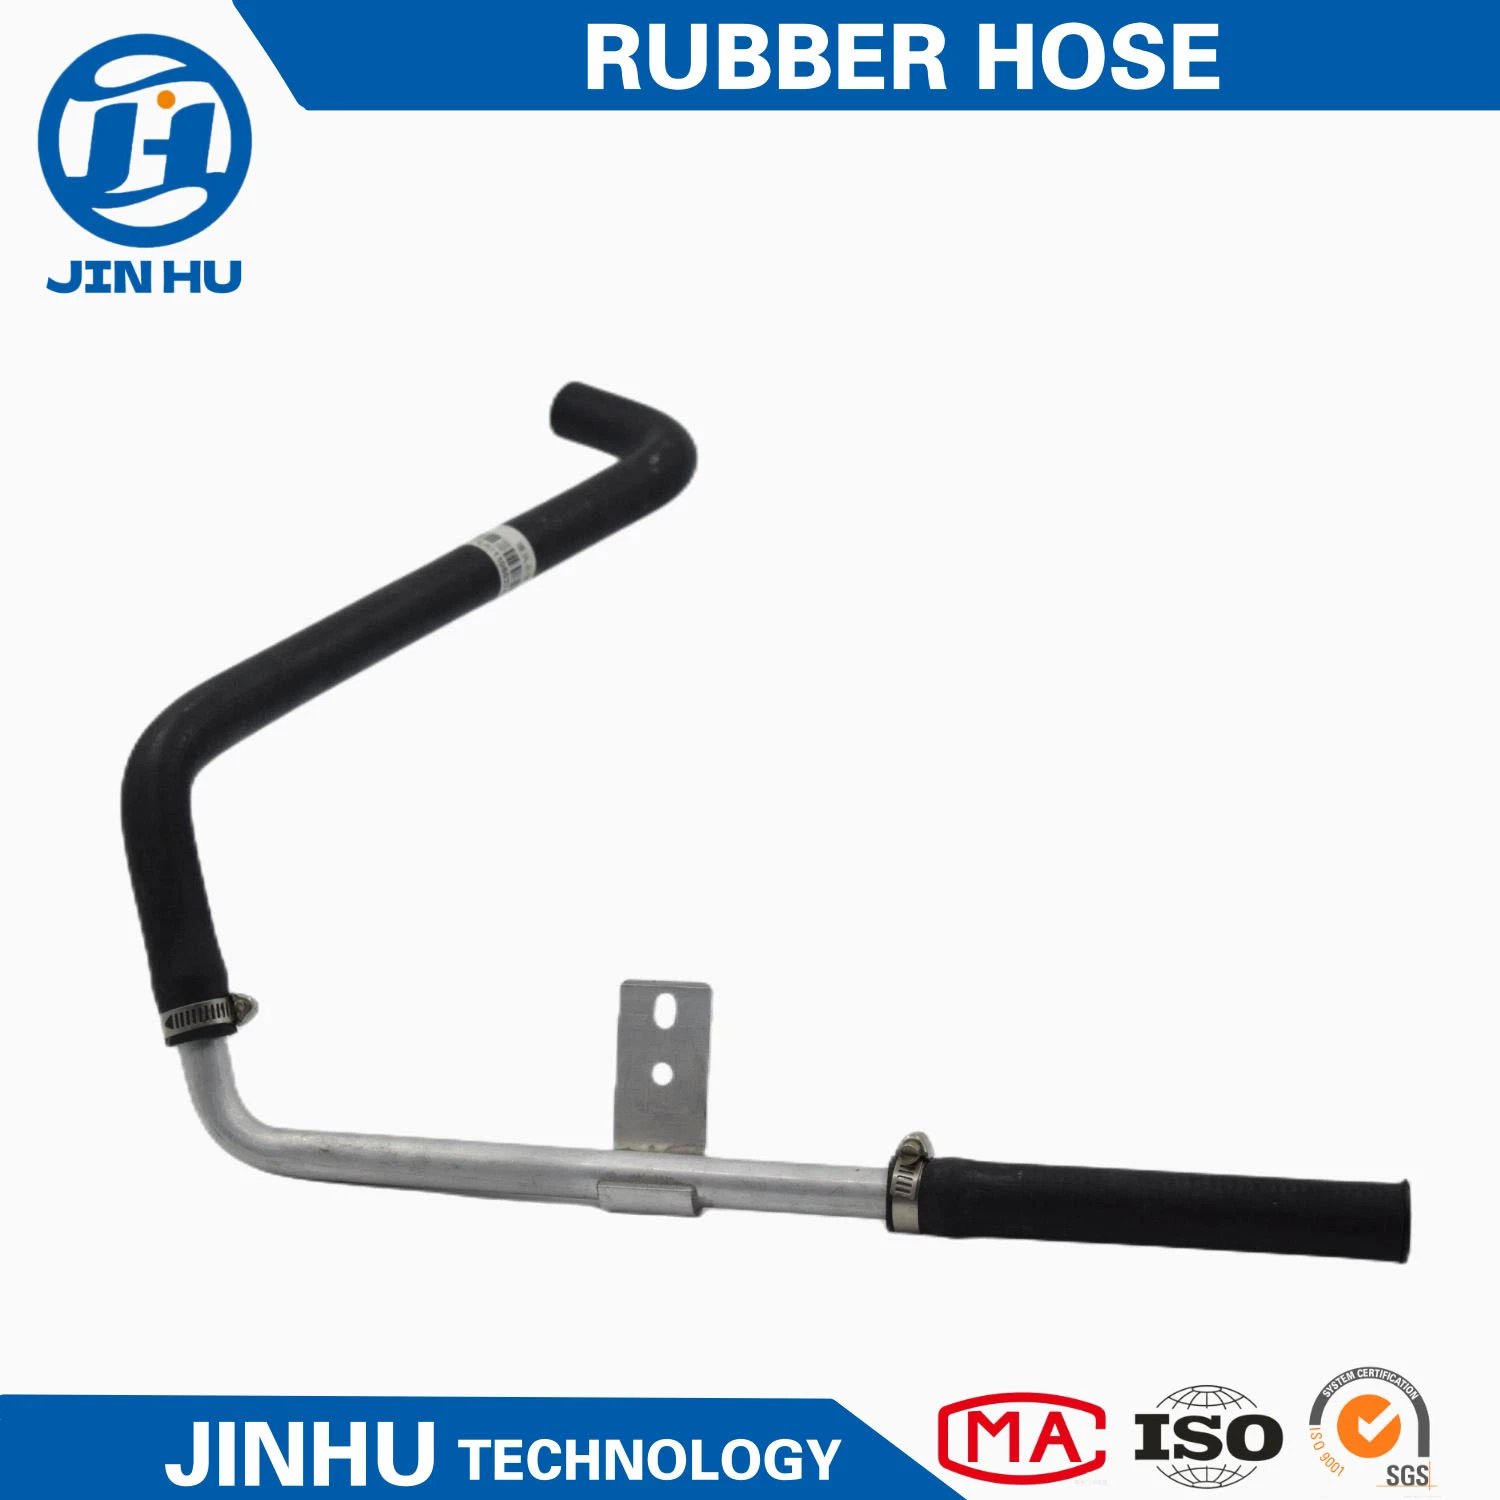 High Quality Air Water Rubber Hose Smooth Surface Industrial Cooling Water Hose Pipe